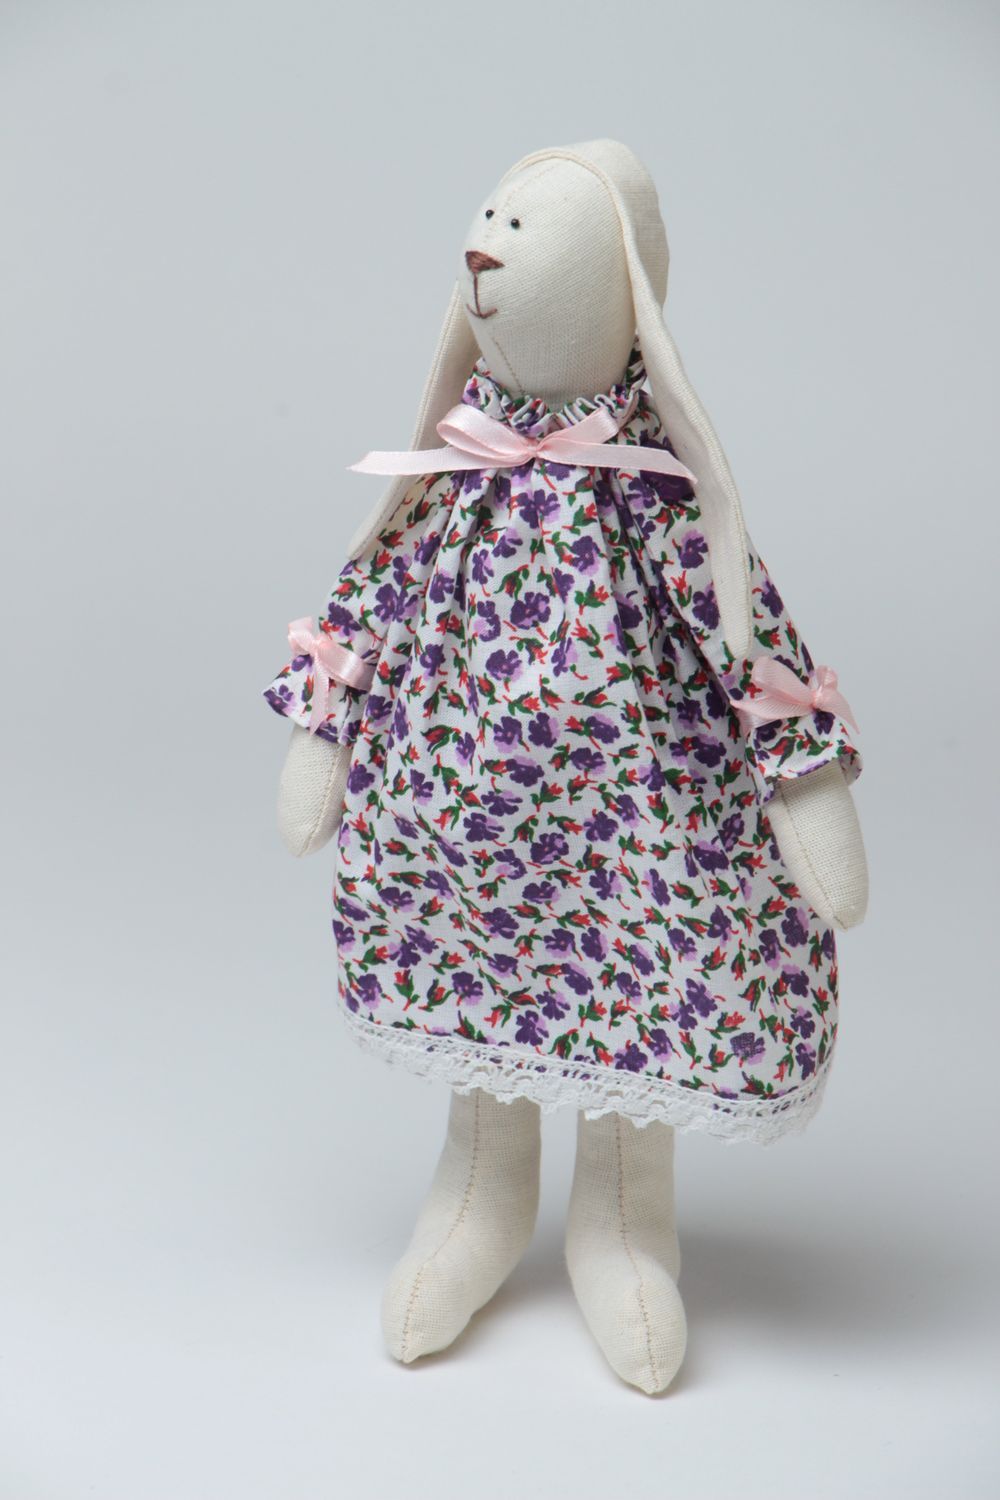 Handmade small fabric soft toy rabbit girl in dress with violet floral pattern photo 2